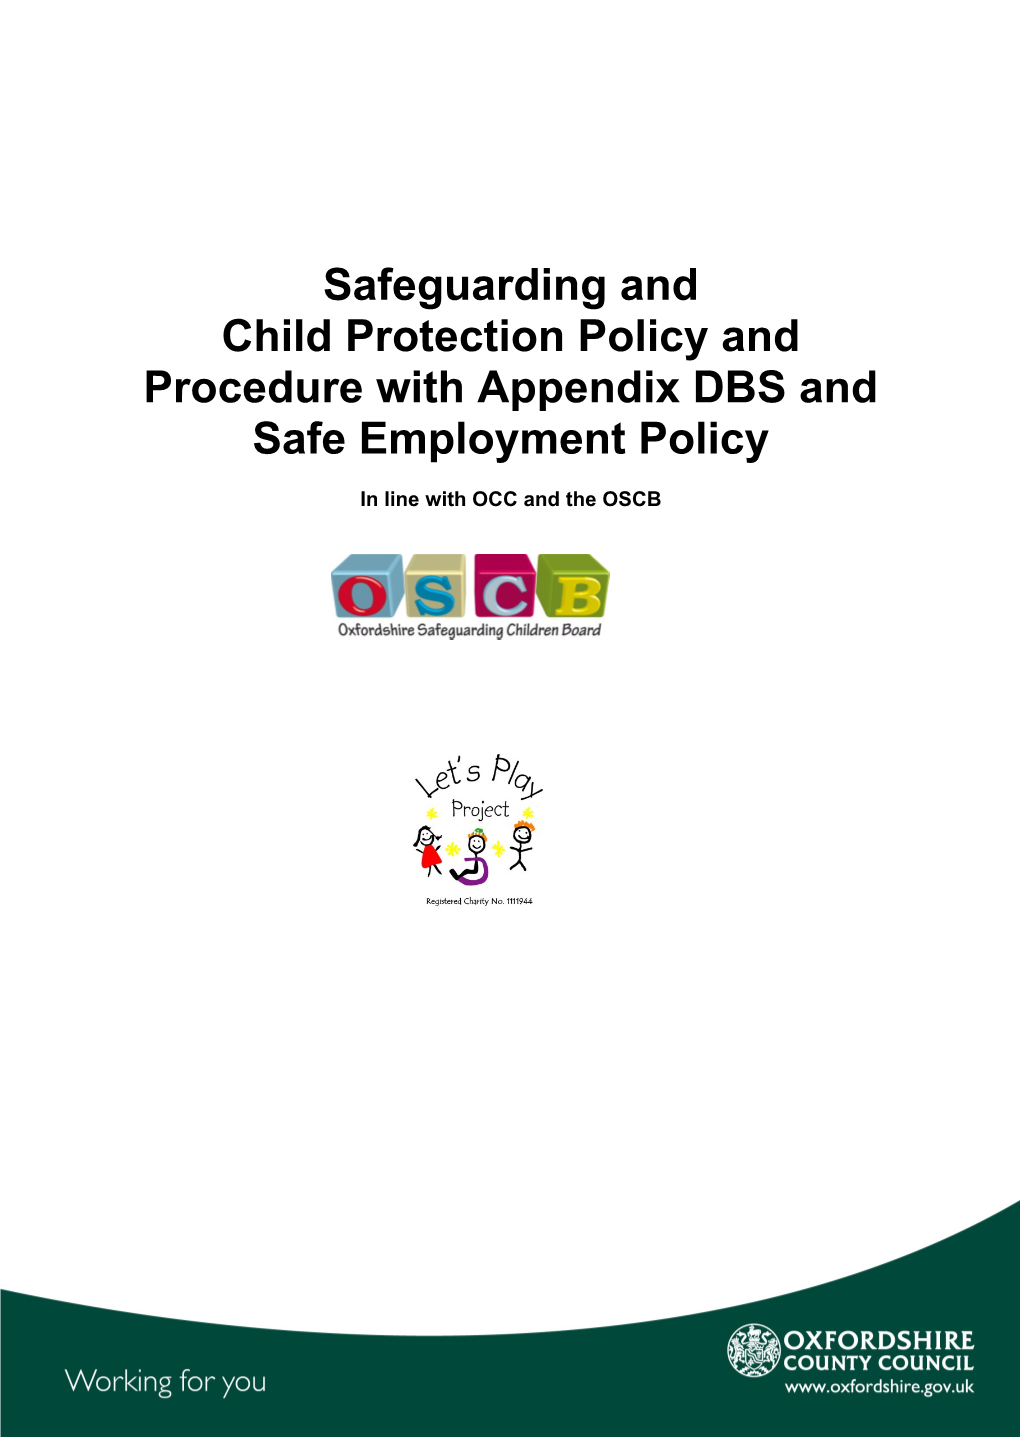 Child Protection Policy and Procedurewith Appendix DBS and Safe Employment Policy